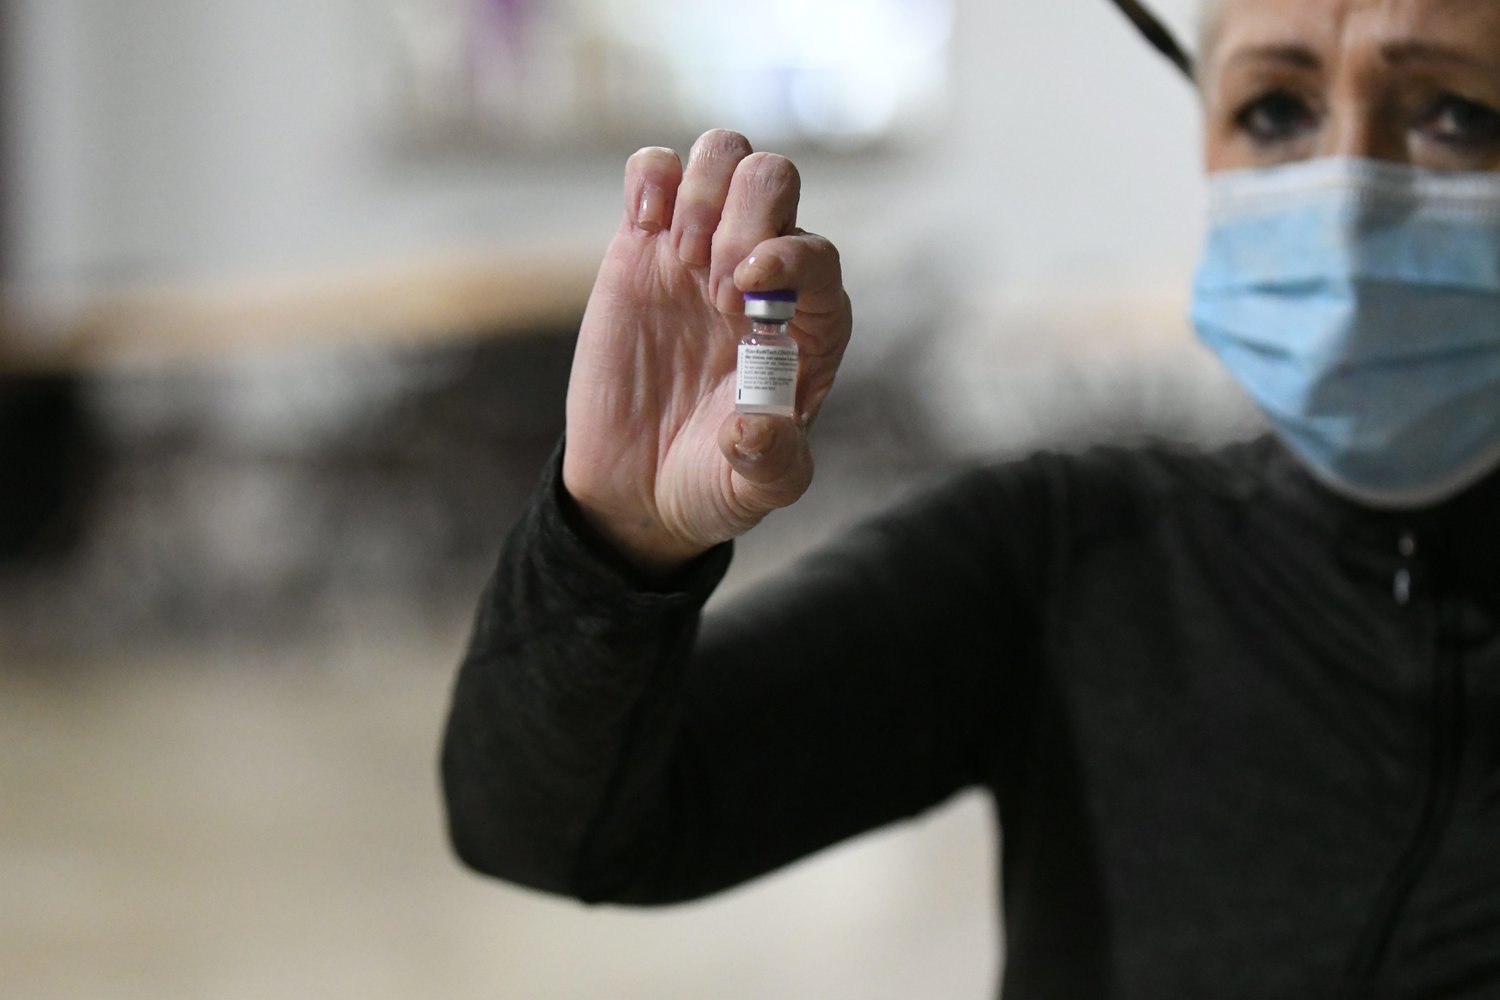 Lori Guffey, clinic supervisor and communicable disease specialist at the Adair County Health Department, holds up a vial of the Pfizer COVID-19 vaccine.